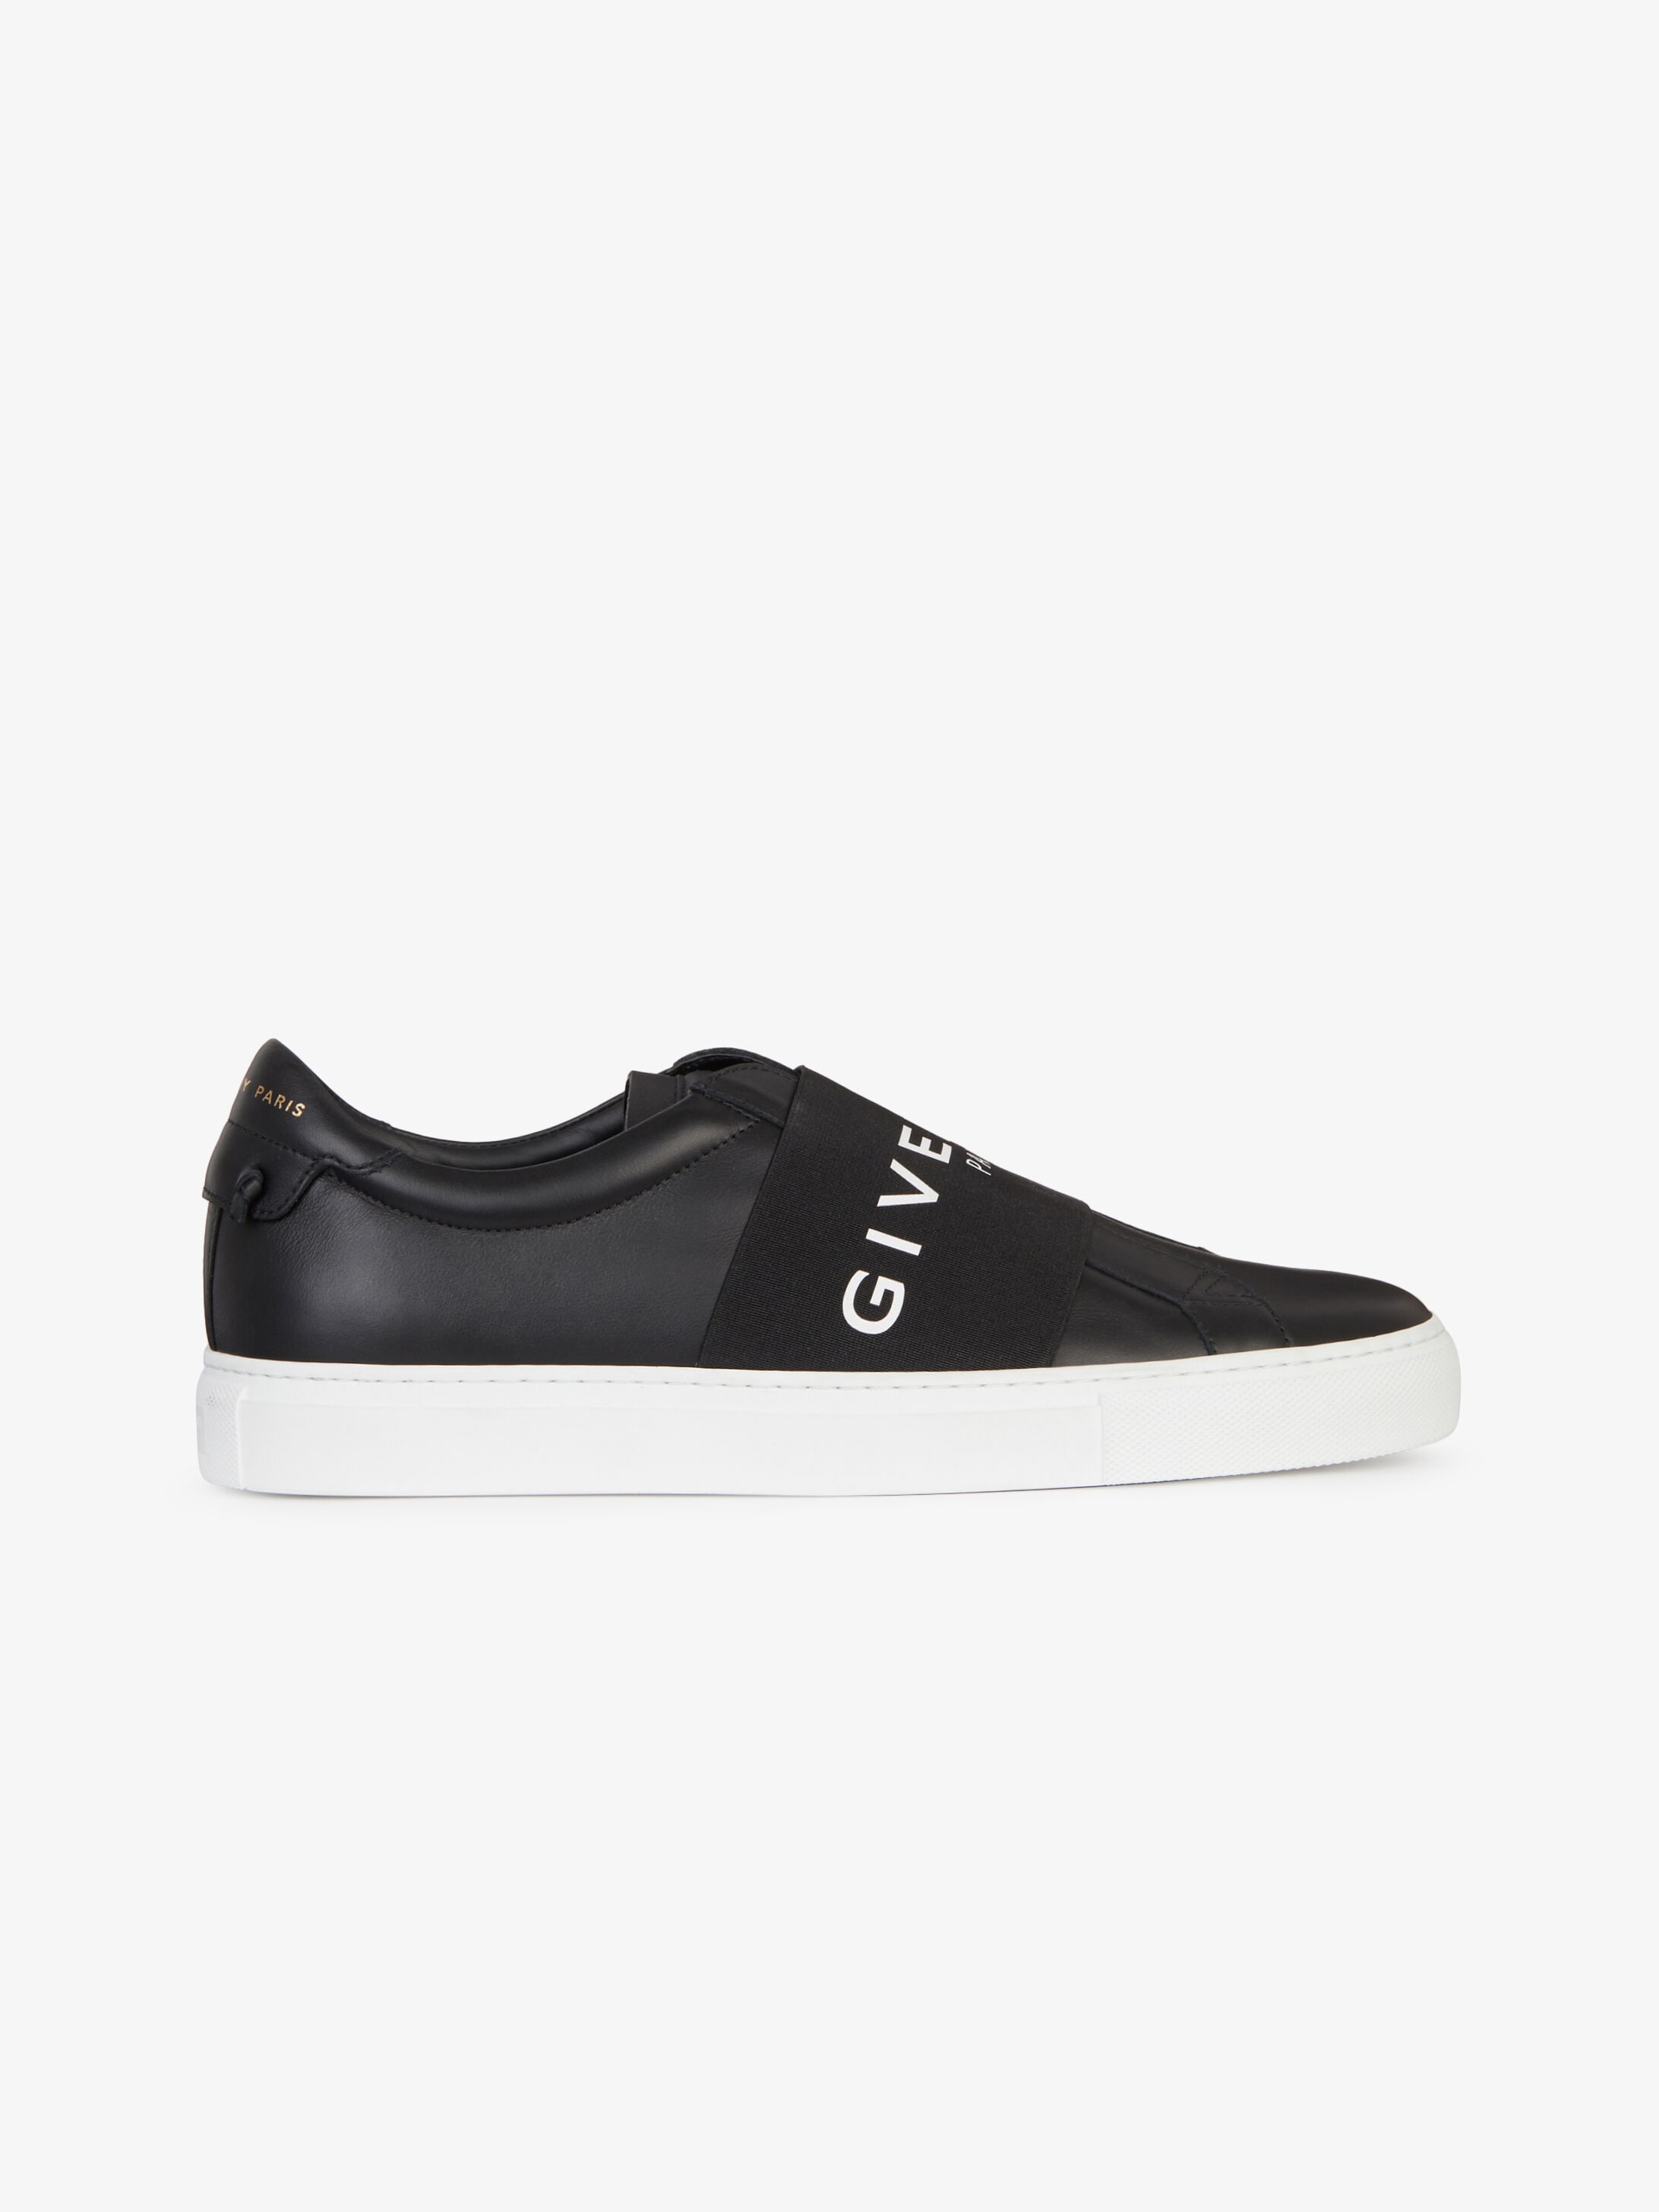 Givenchy Urban Street Logo-print Leather Slip-on Sneakers In White |  ModeSens | High heel shoes, Womens fashion shoes, Fashion shoes